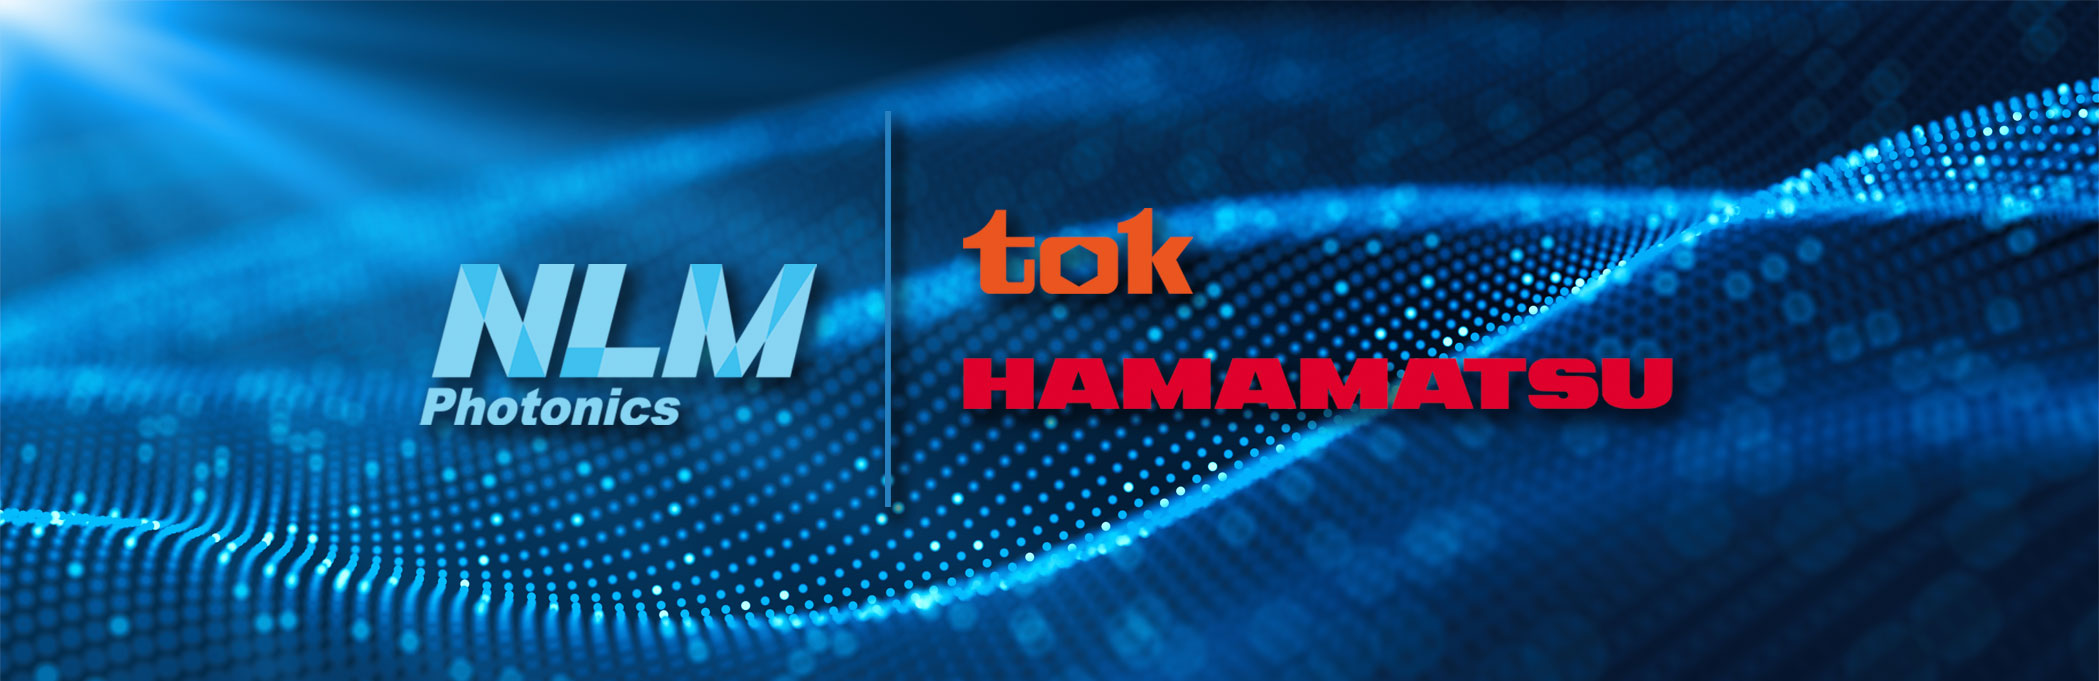 Banner background is blue with ripping cables with light shining over them. Upfront is NLM Photonics logo on Left in light blue with a dividing darker blue line in the middle. On the right side, top to bottom, is TOK's logo is bright orange and below is Hamamatsu's logo in bright red